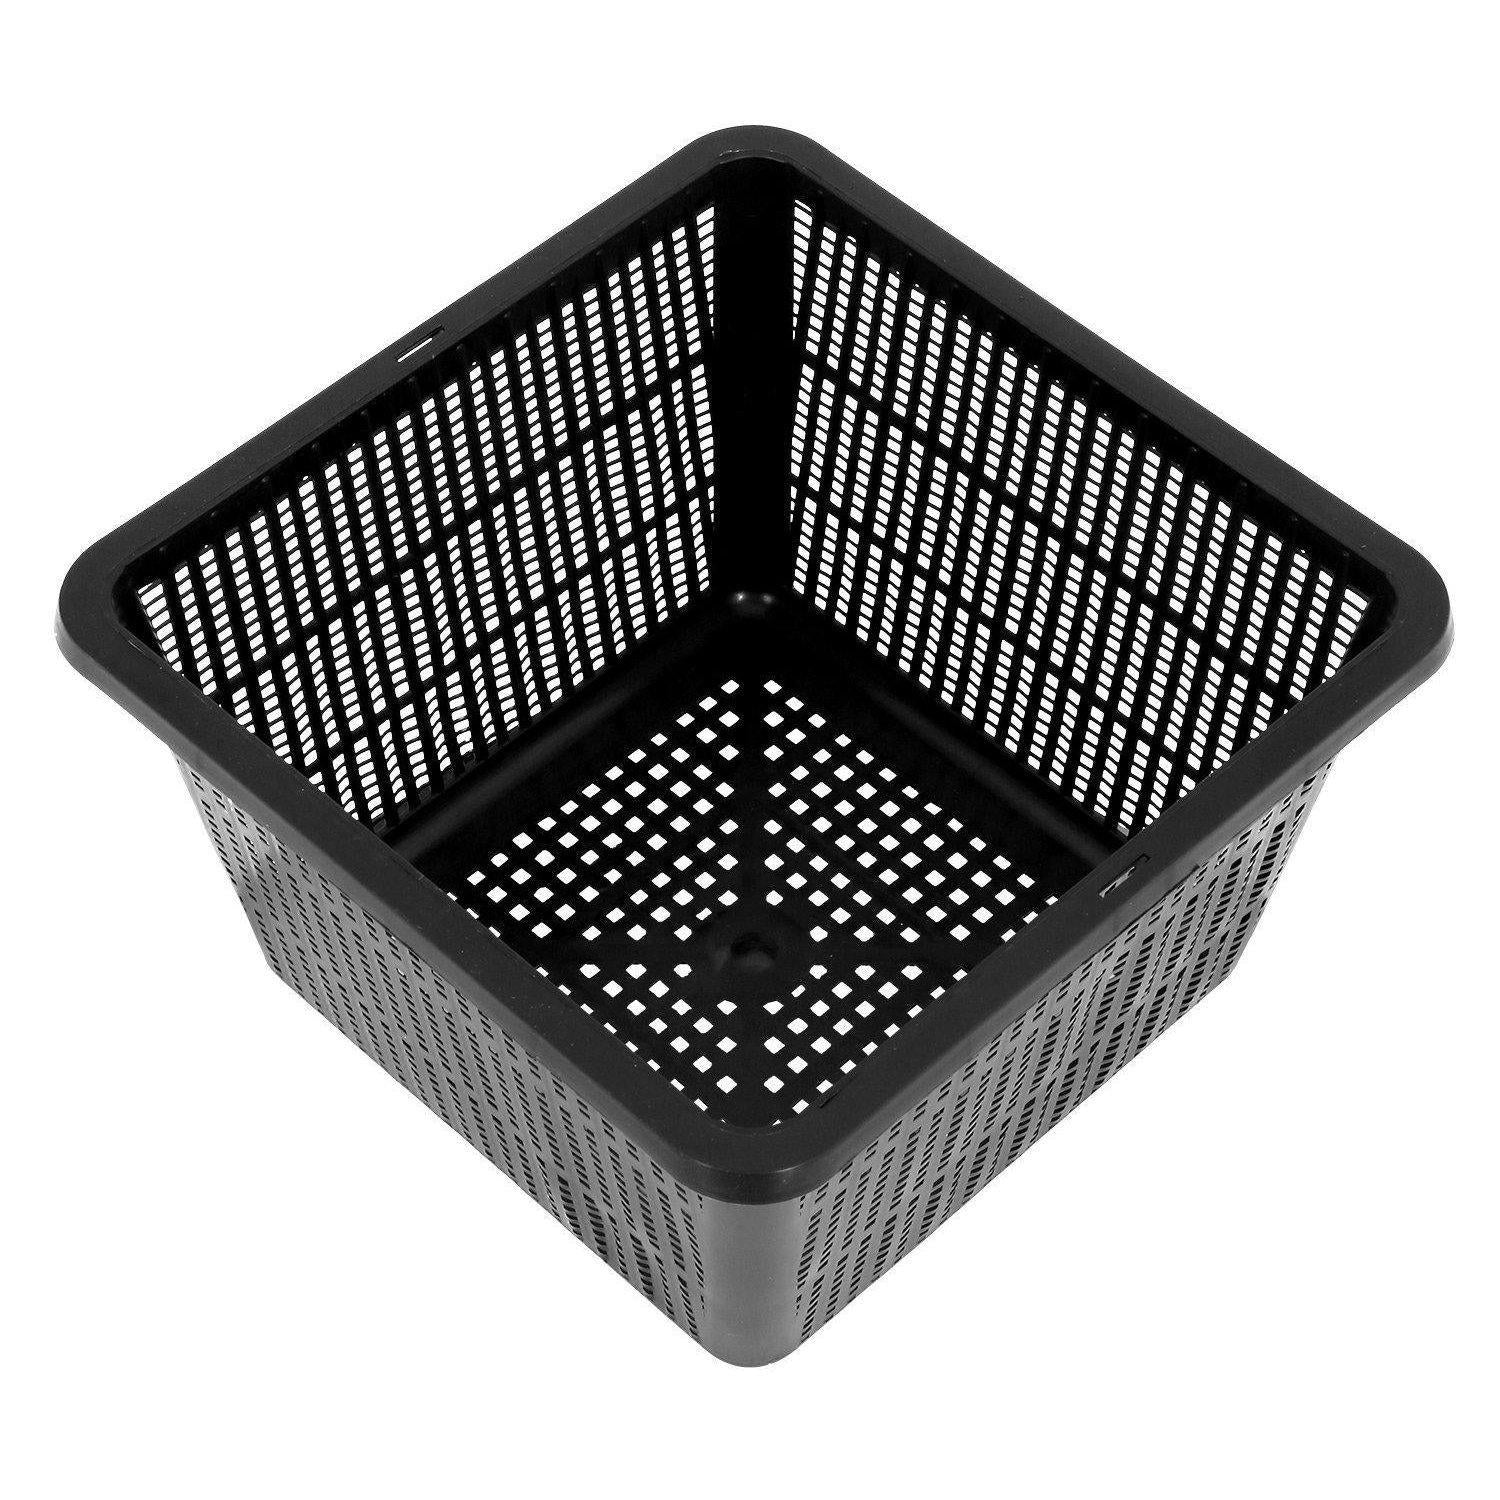 Containers - Gro Pro - 9" Square 5" tall - Mesh Pot - 638104004664- Gardin Warehouse